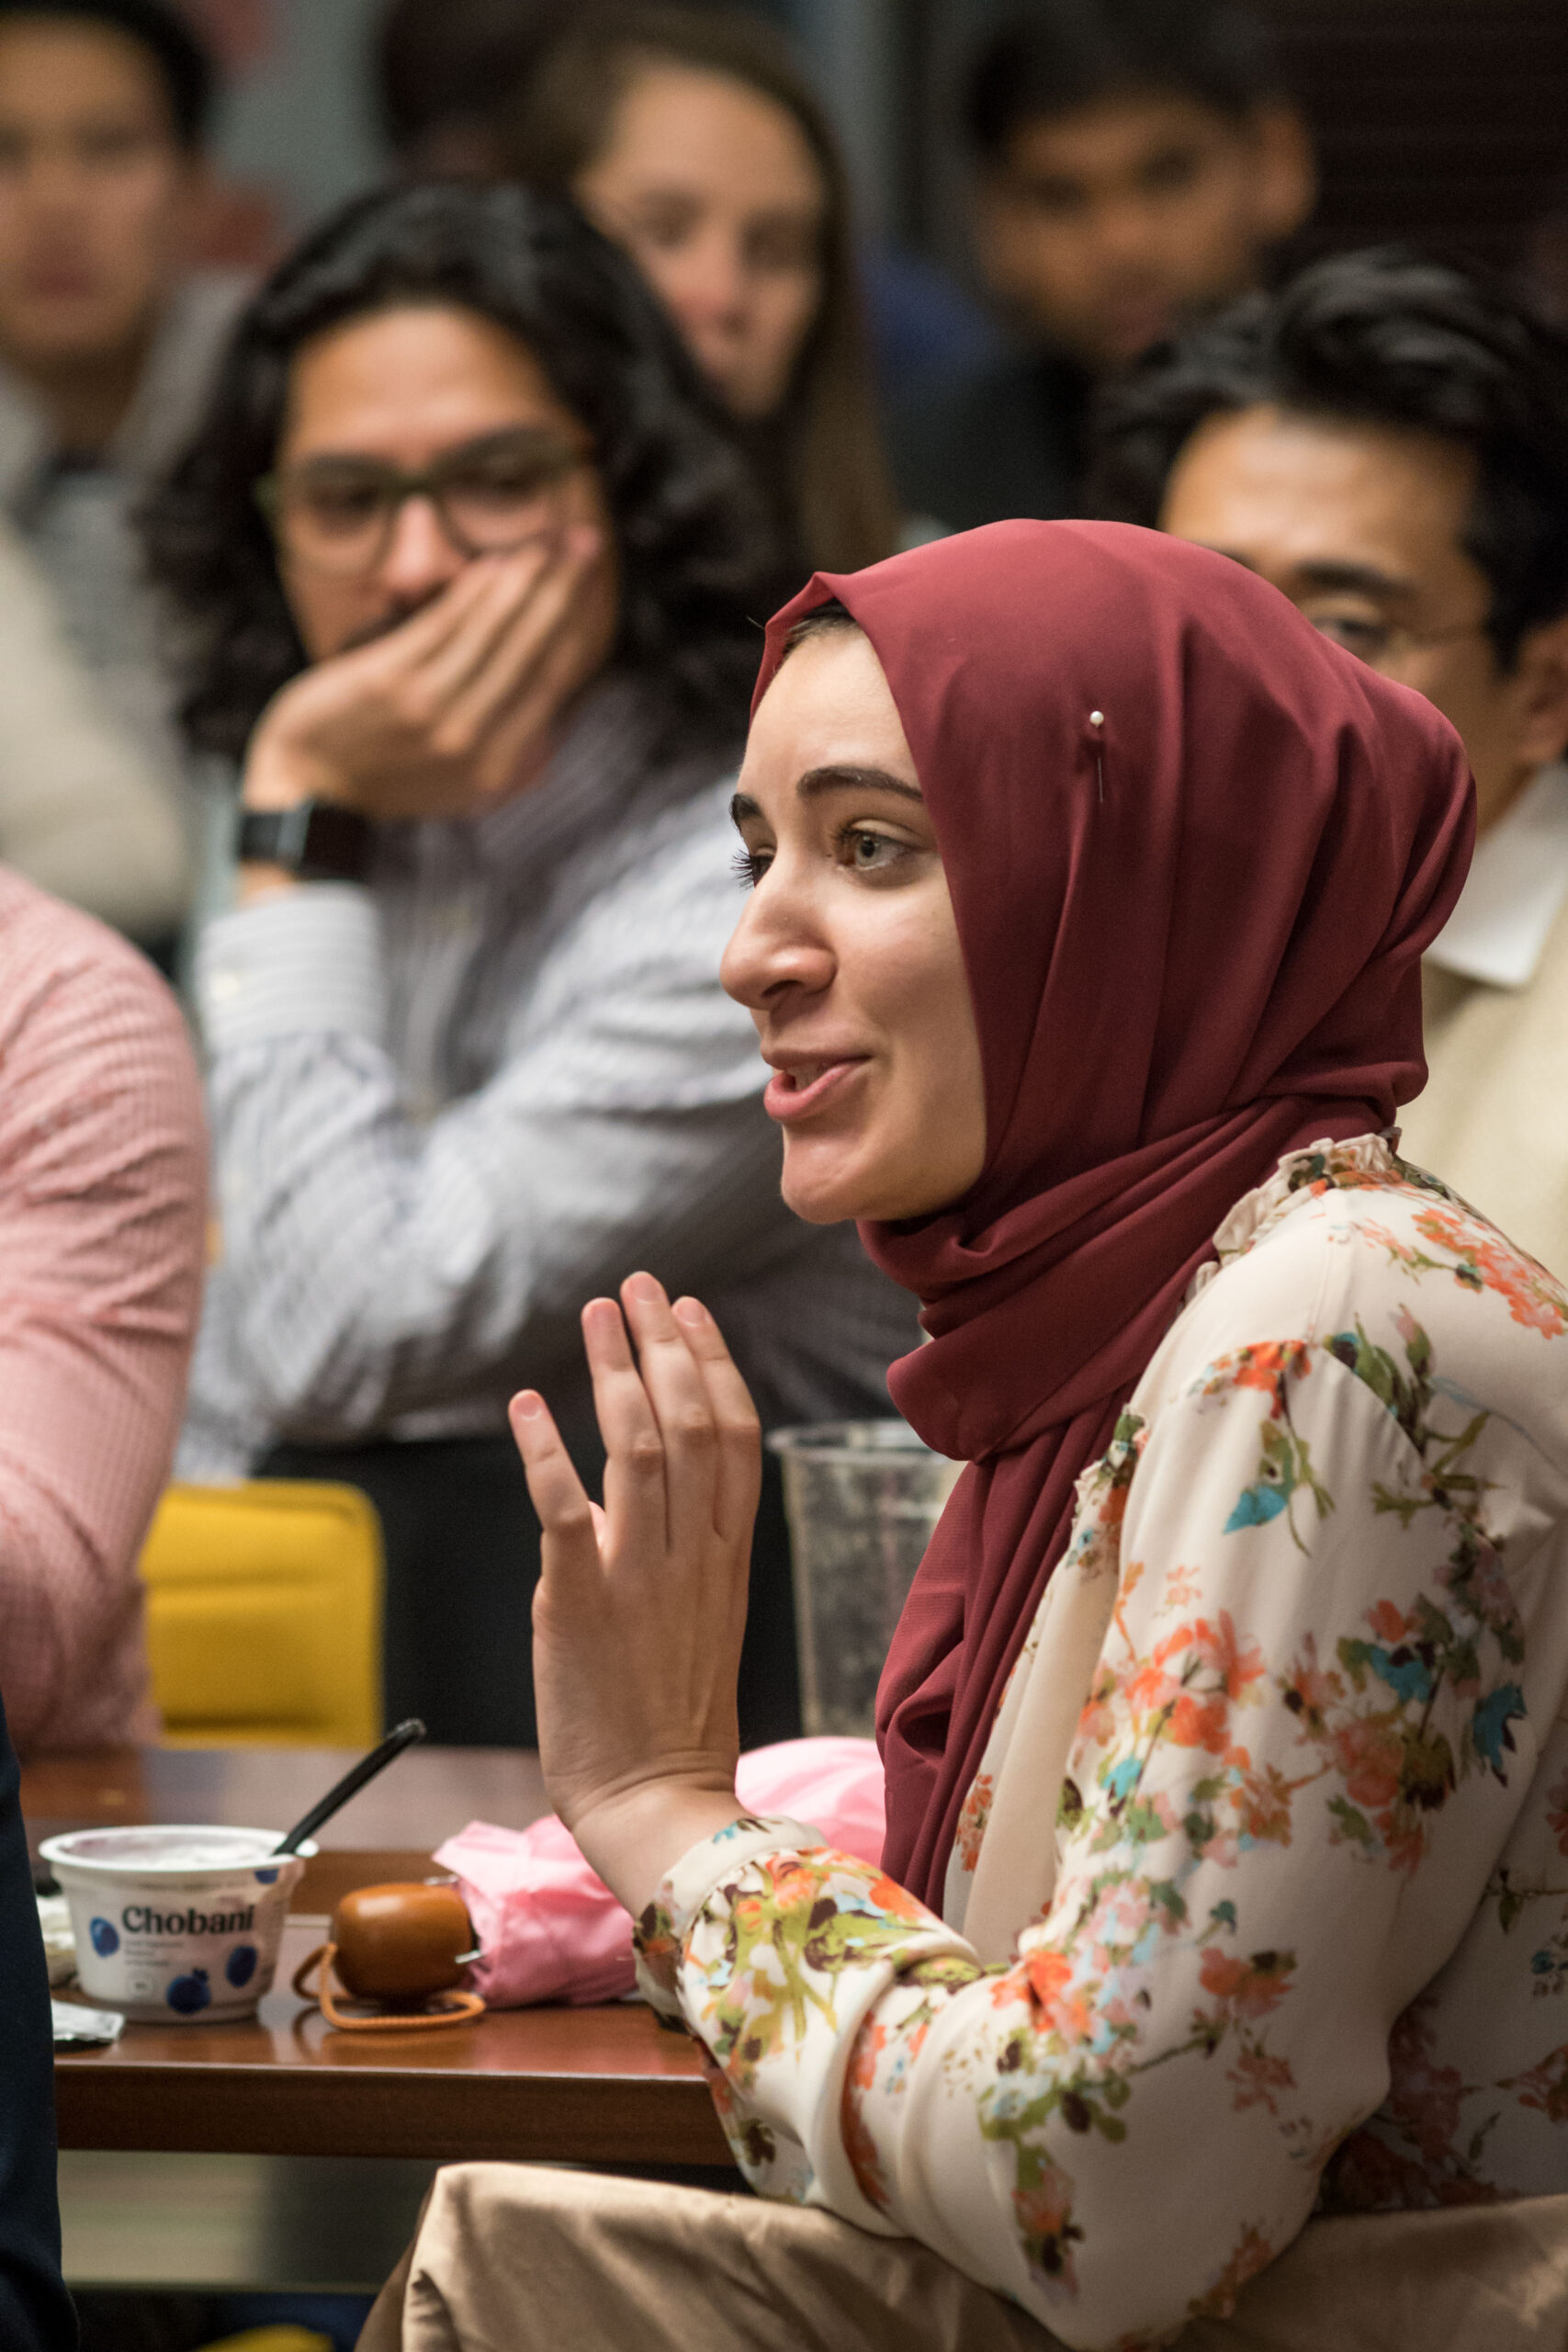 Photograph of people sitting and listening to someone speak. The woman in focus is in her 20s with light skin tone and wearing a red hijab and floral blouse, she is speaking with a hand gesture and a smile.